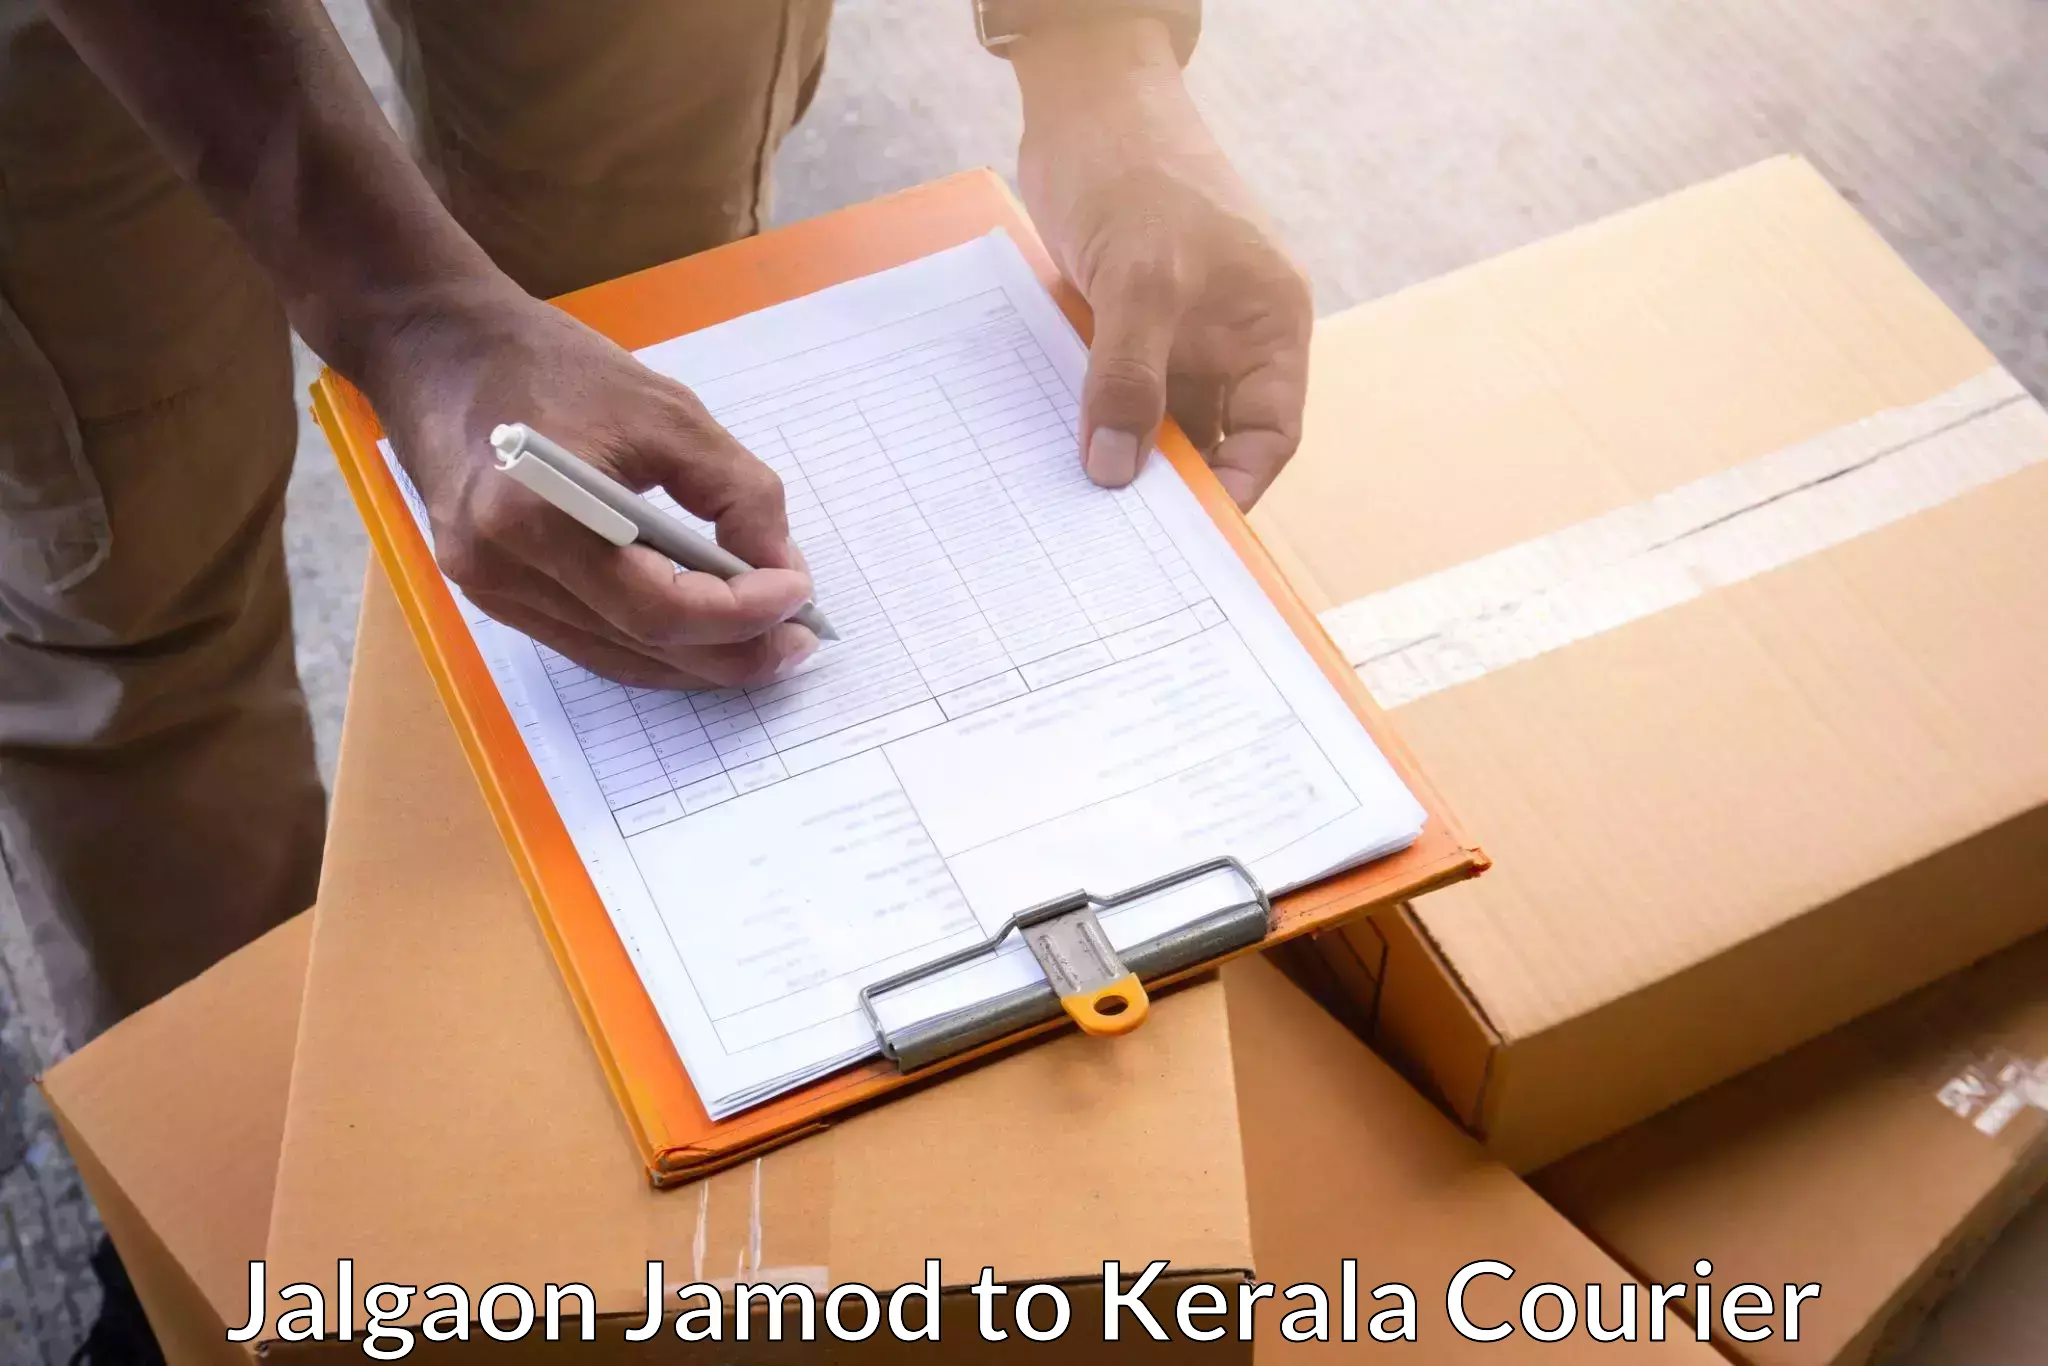 Courier rate comparison Jalgaon Jamod to Thalassery